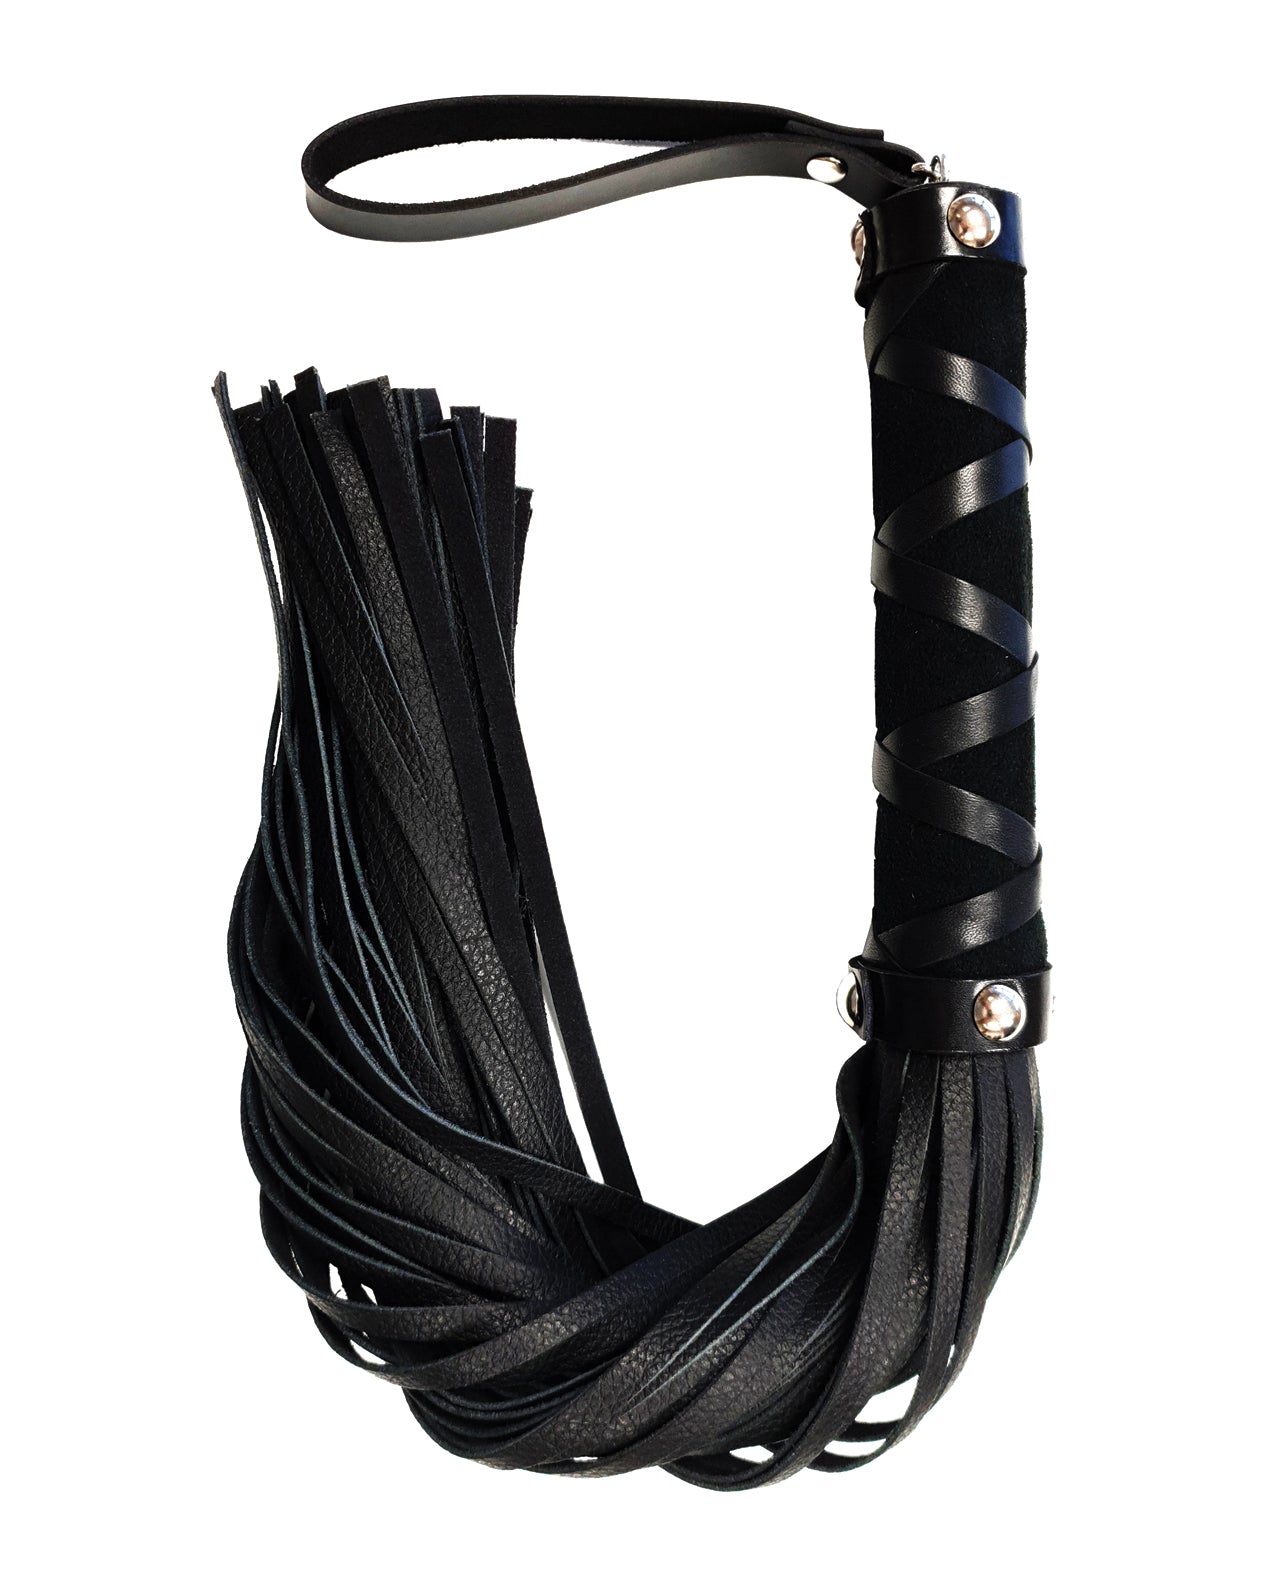 Shop for the Rouge Short Leather Flogger: Stylish Impact & Precision at My Ruby Lips